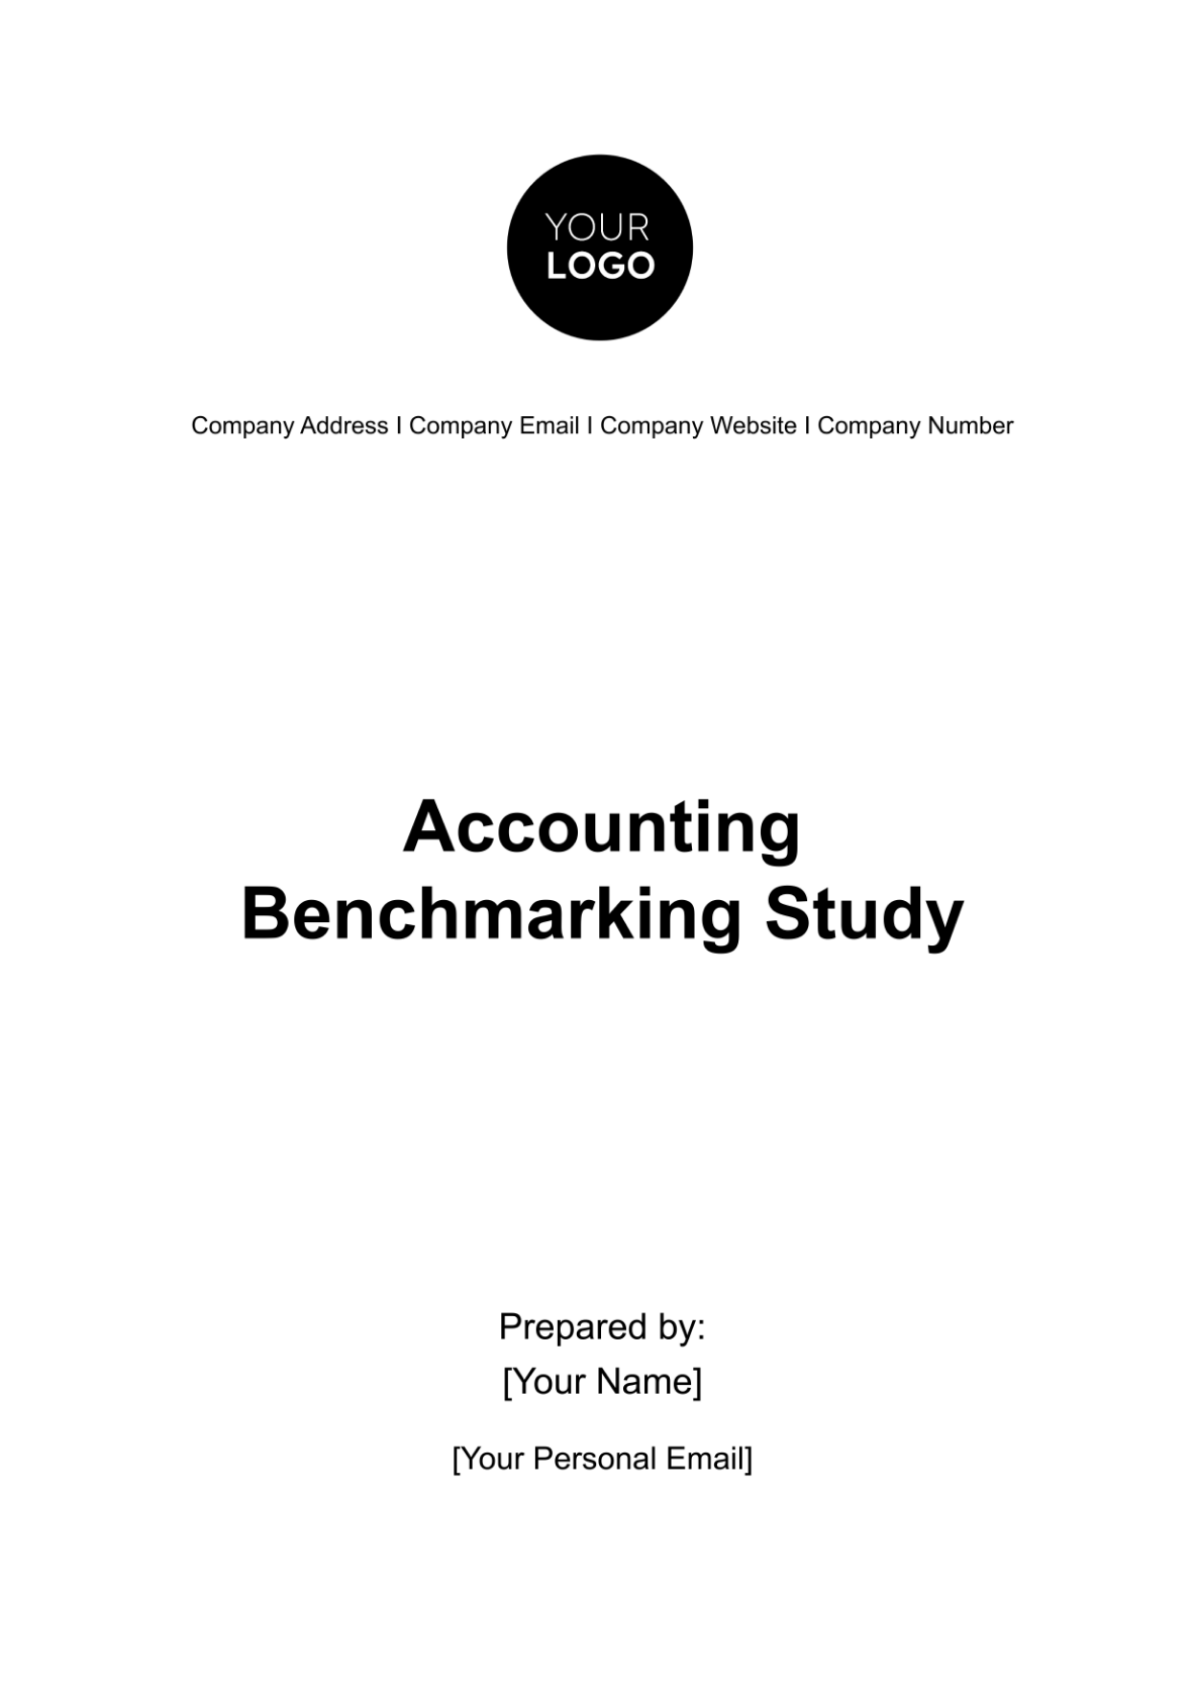 Accounting Benchmarking Study Template